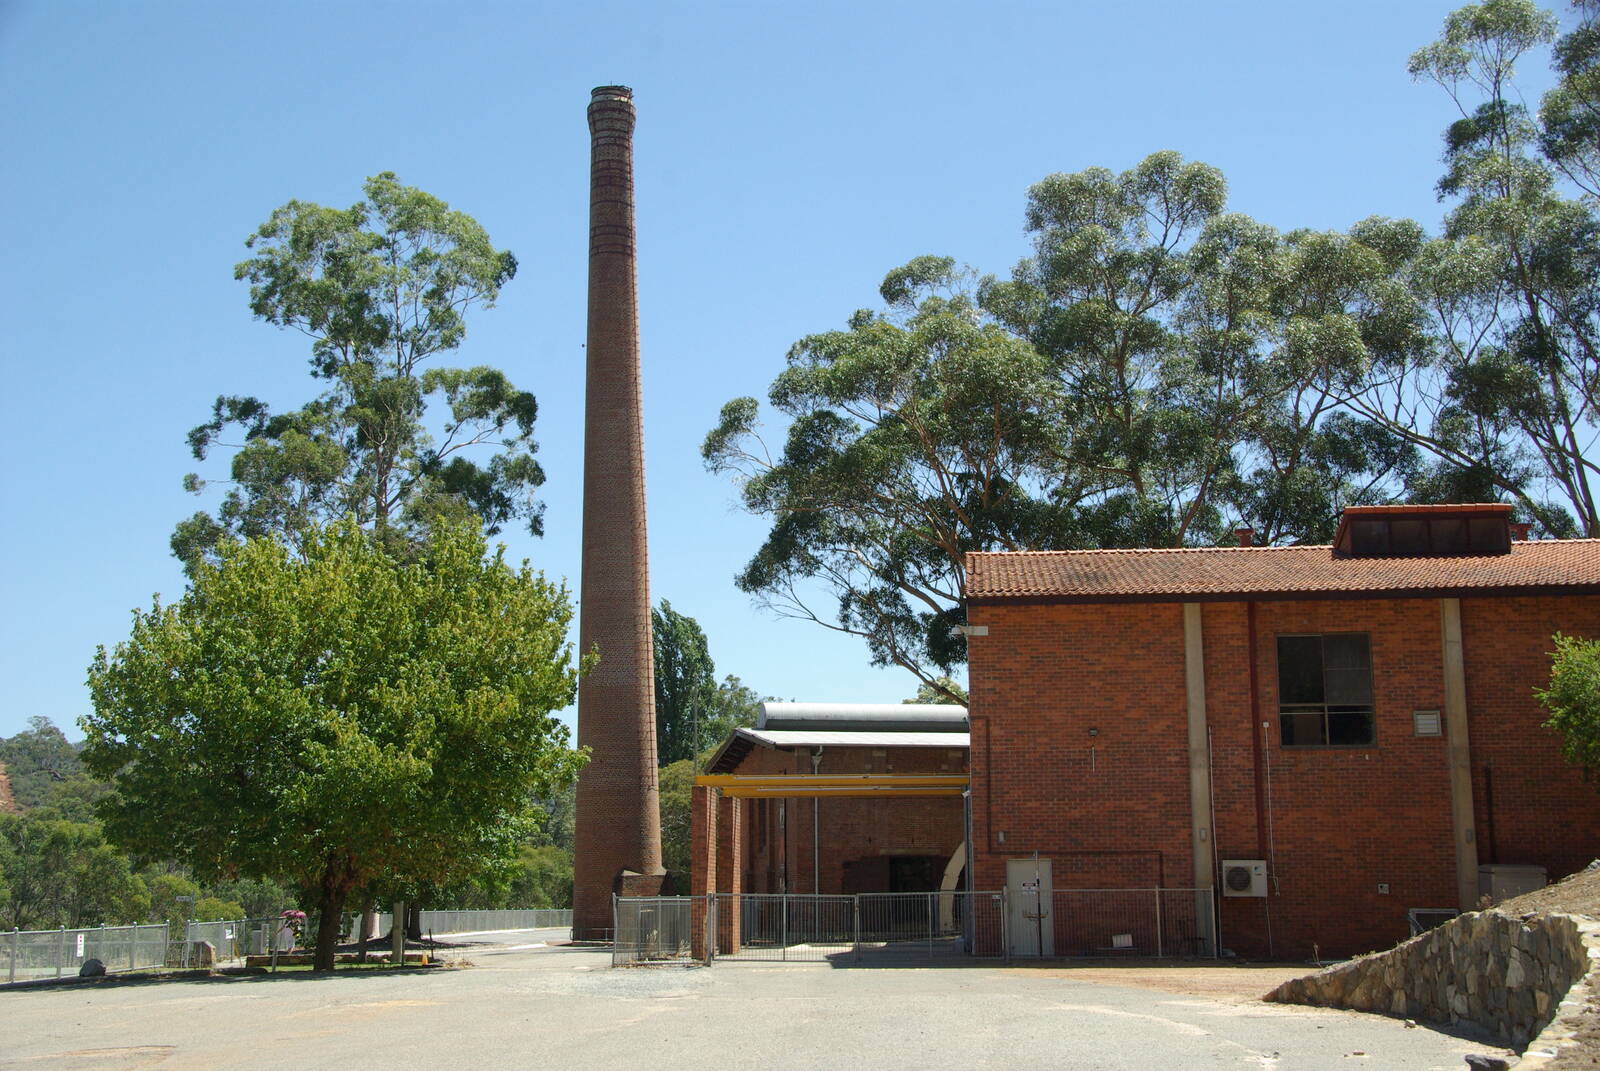 Image of Mundaring Weir and No1 Pump Station by Nigel Shaw